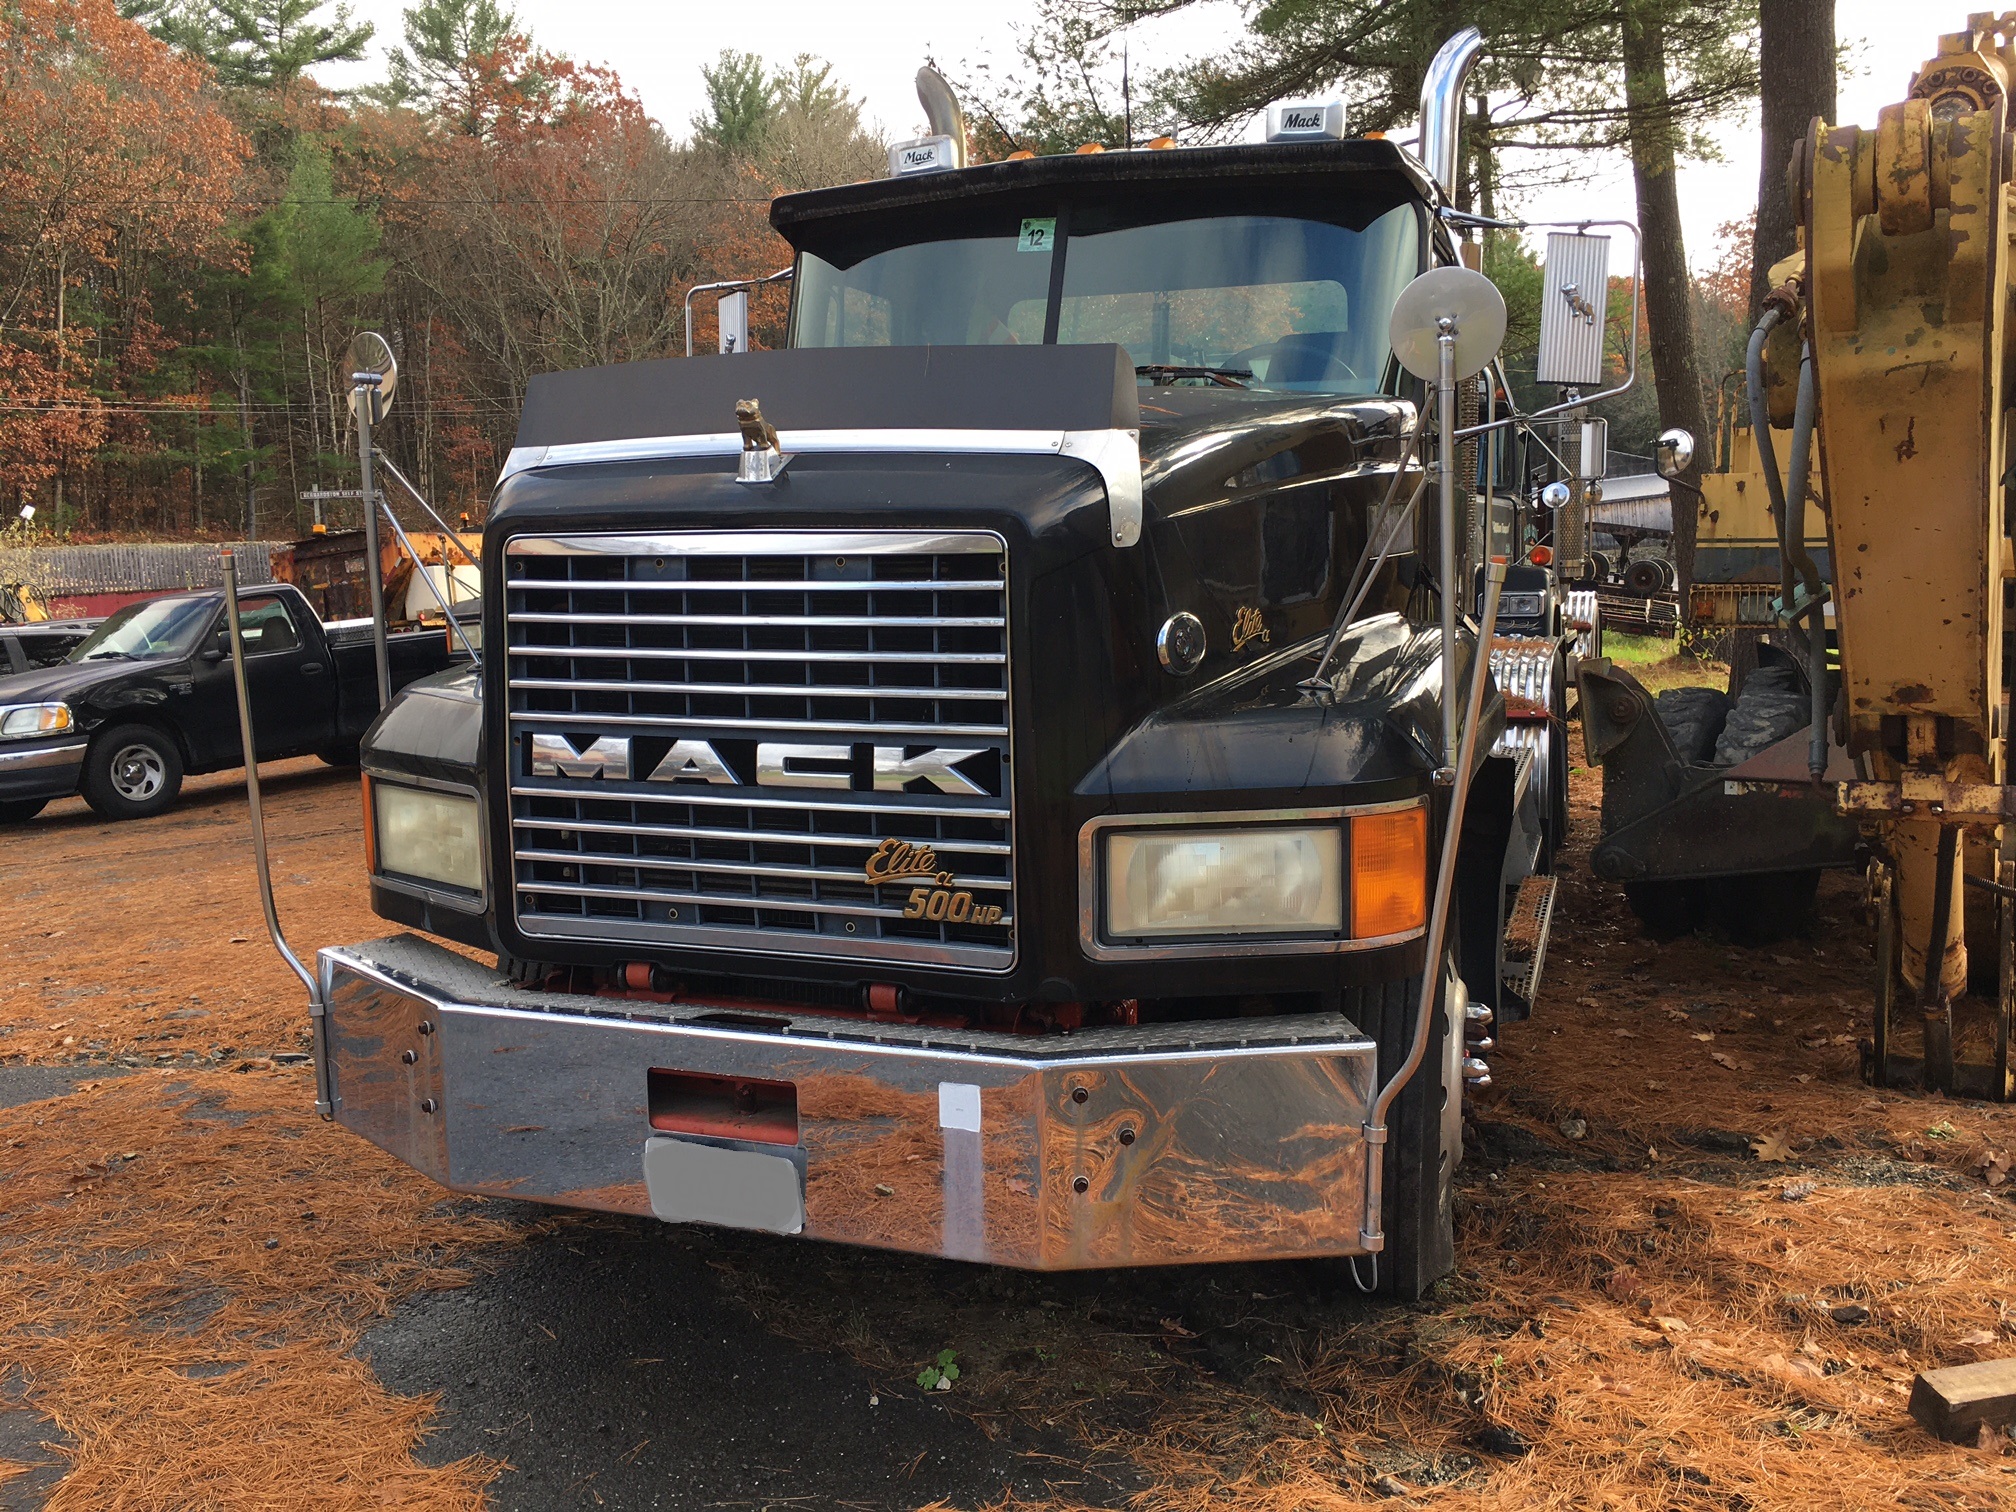 Used Mack truck for sale.